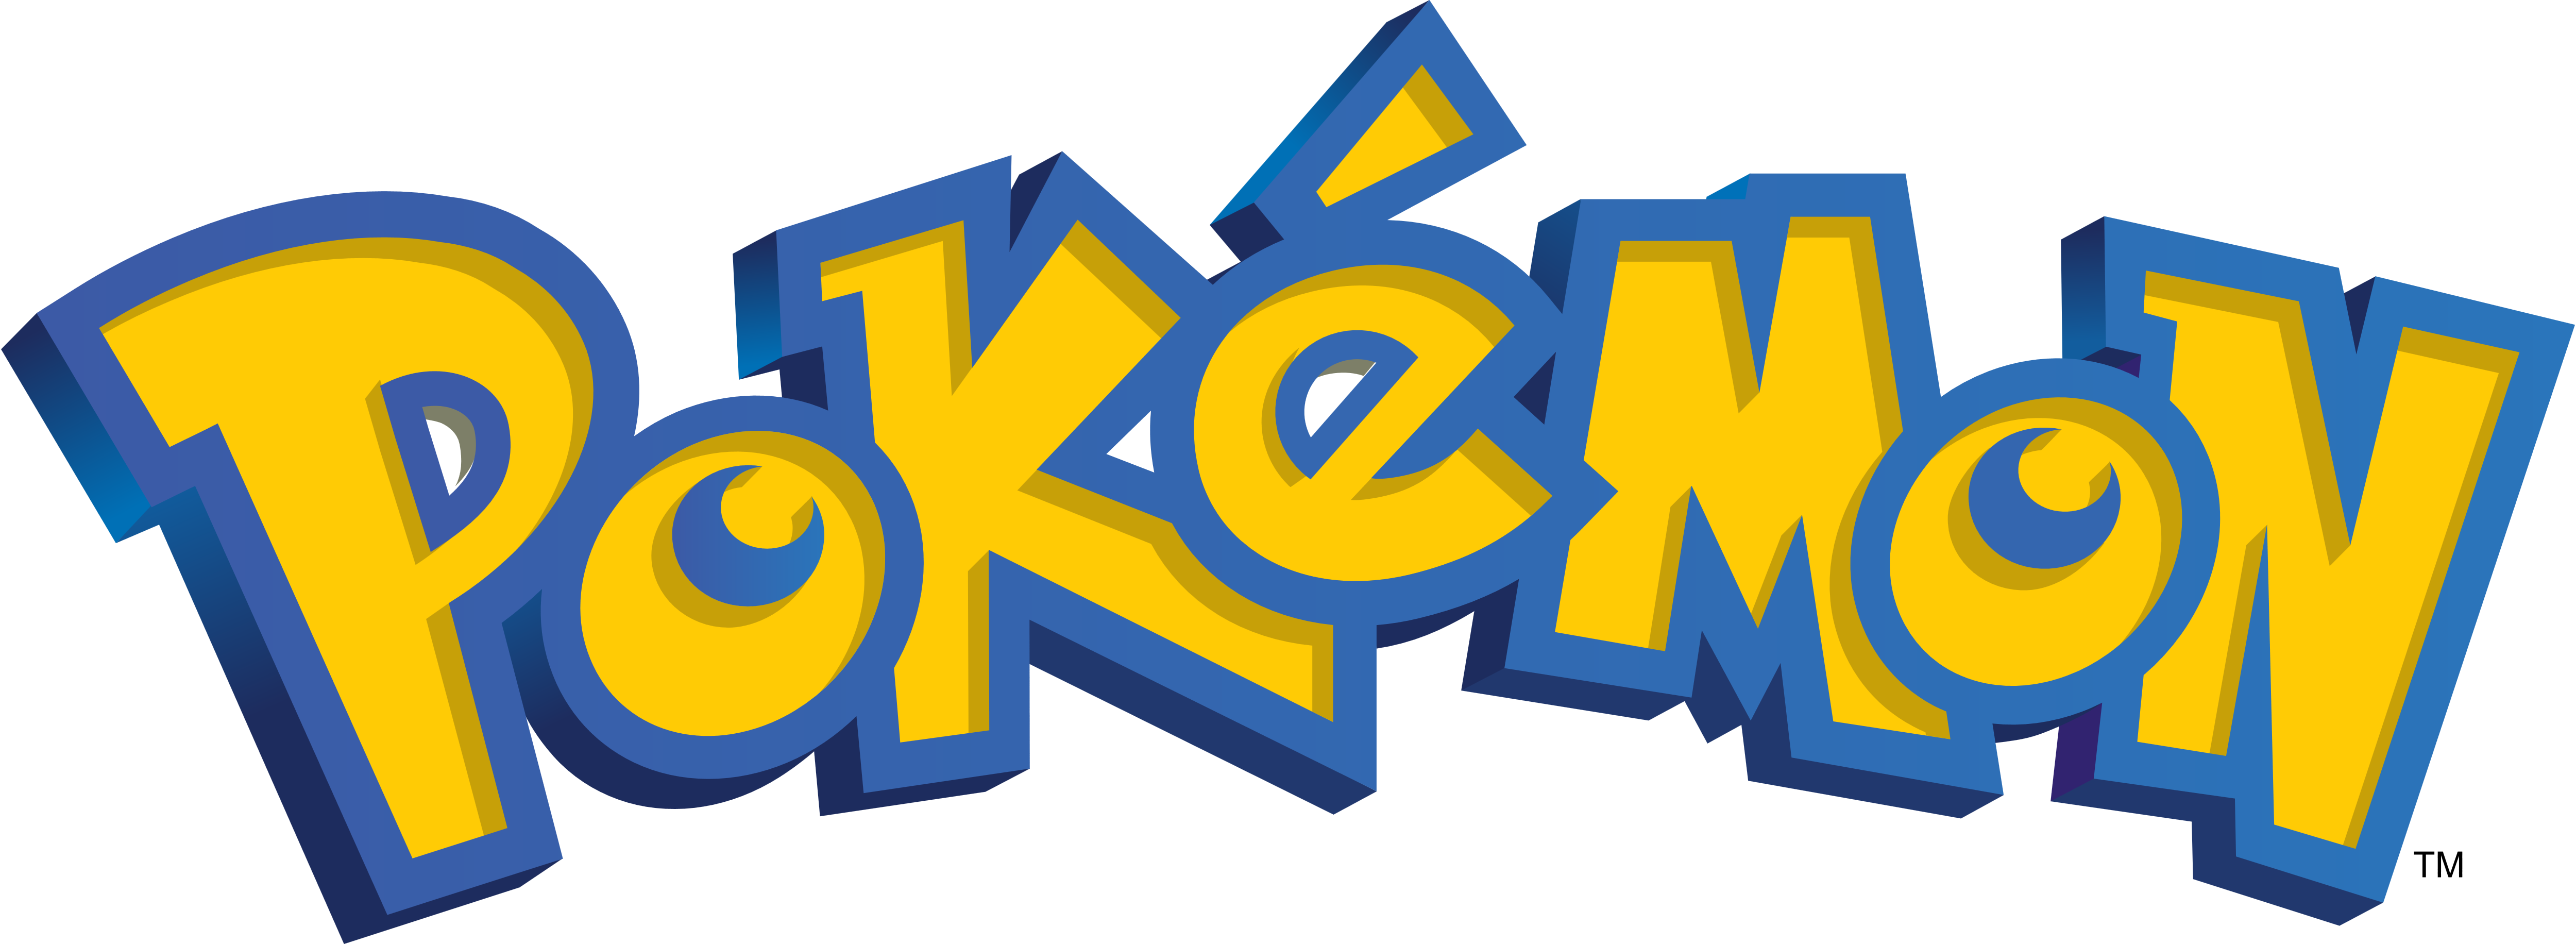 Pokemon Go Png Transparent Images Png All